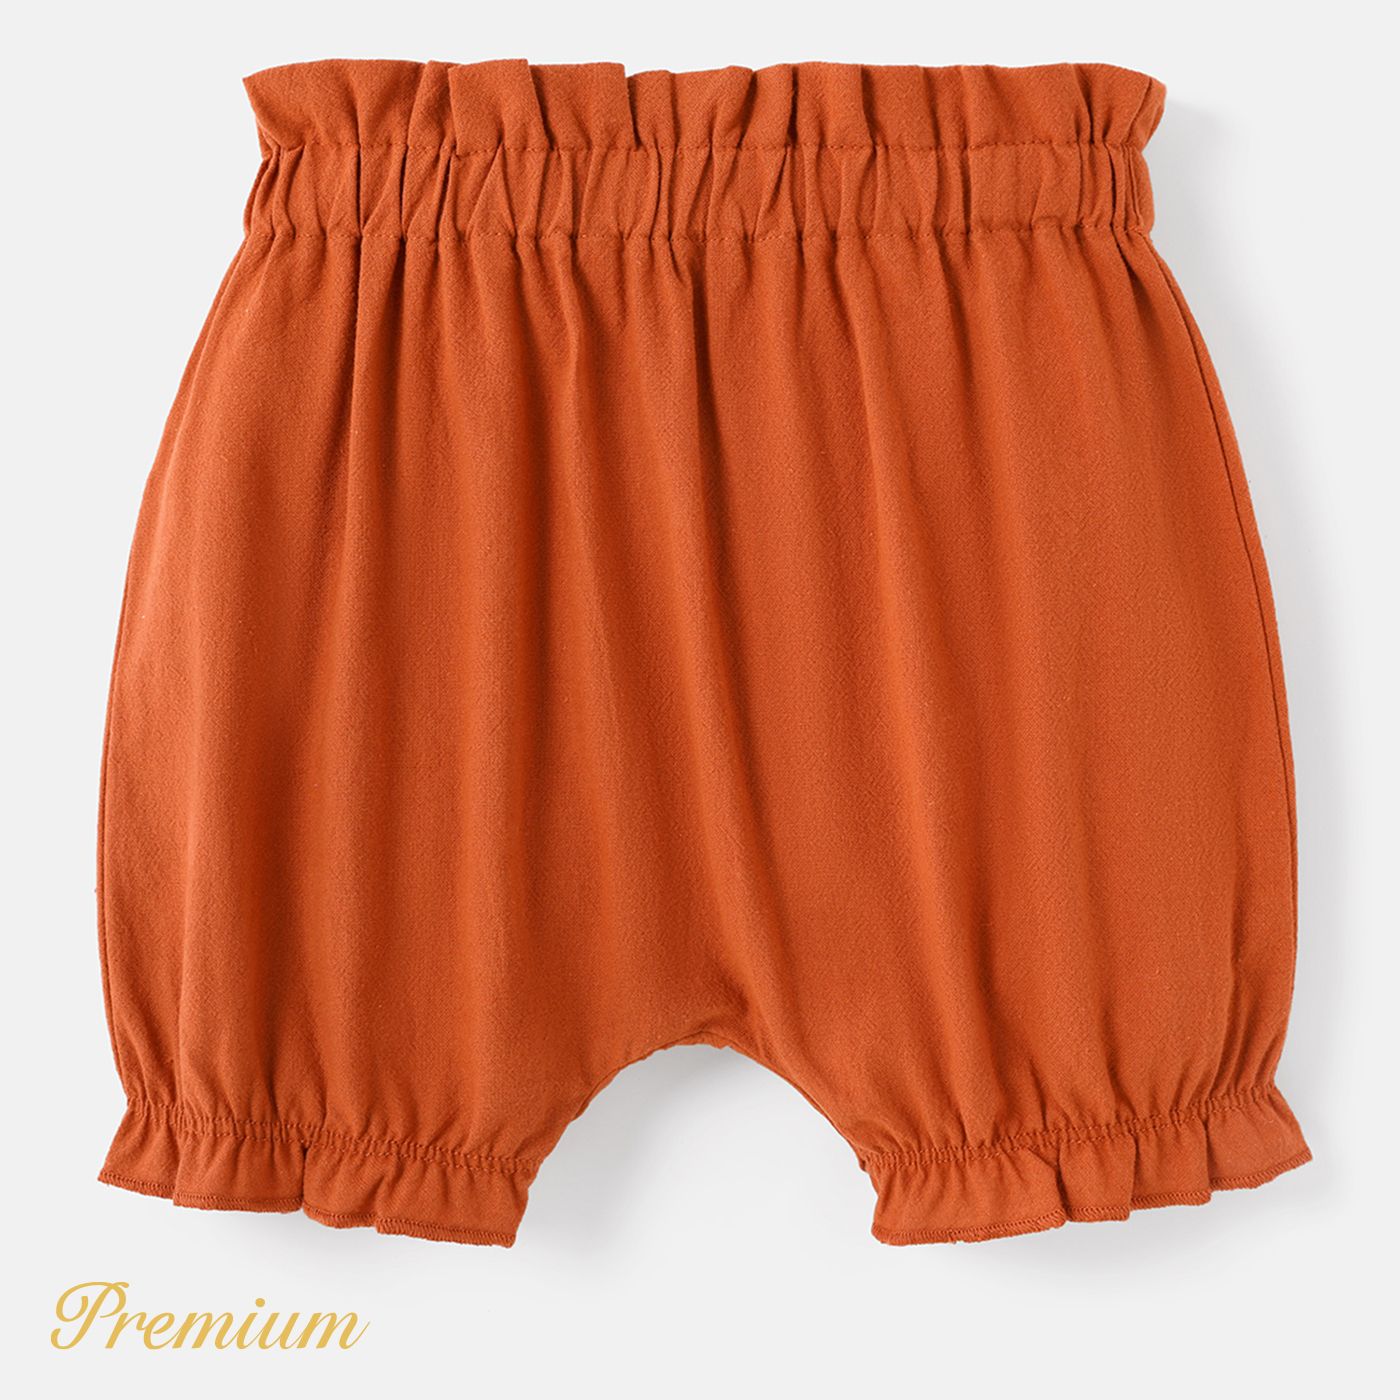 Baby Girl 100% Cotton Solid Bloomer Shorts